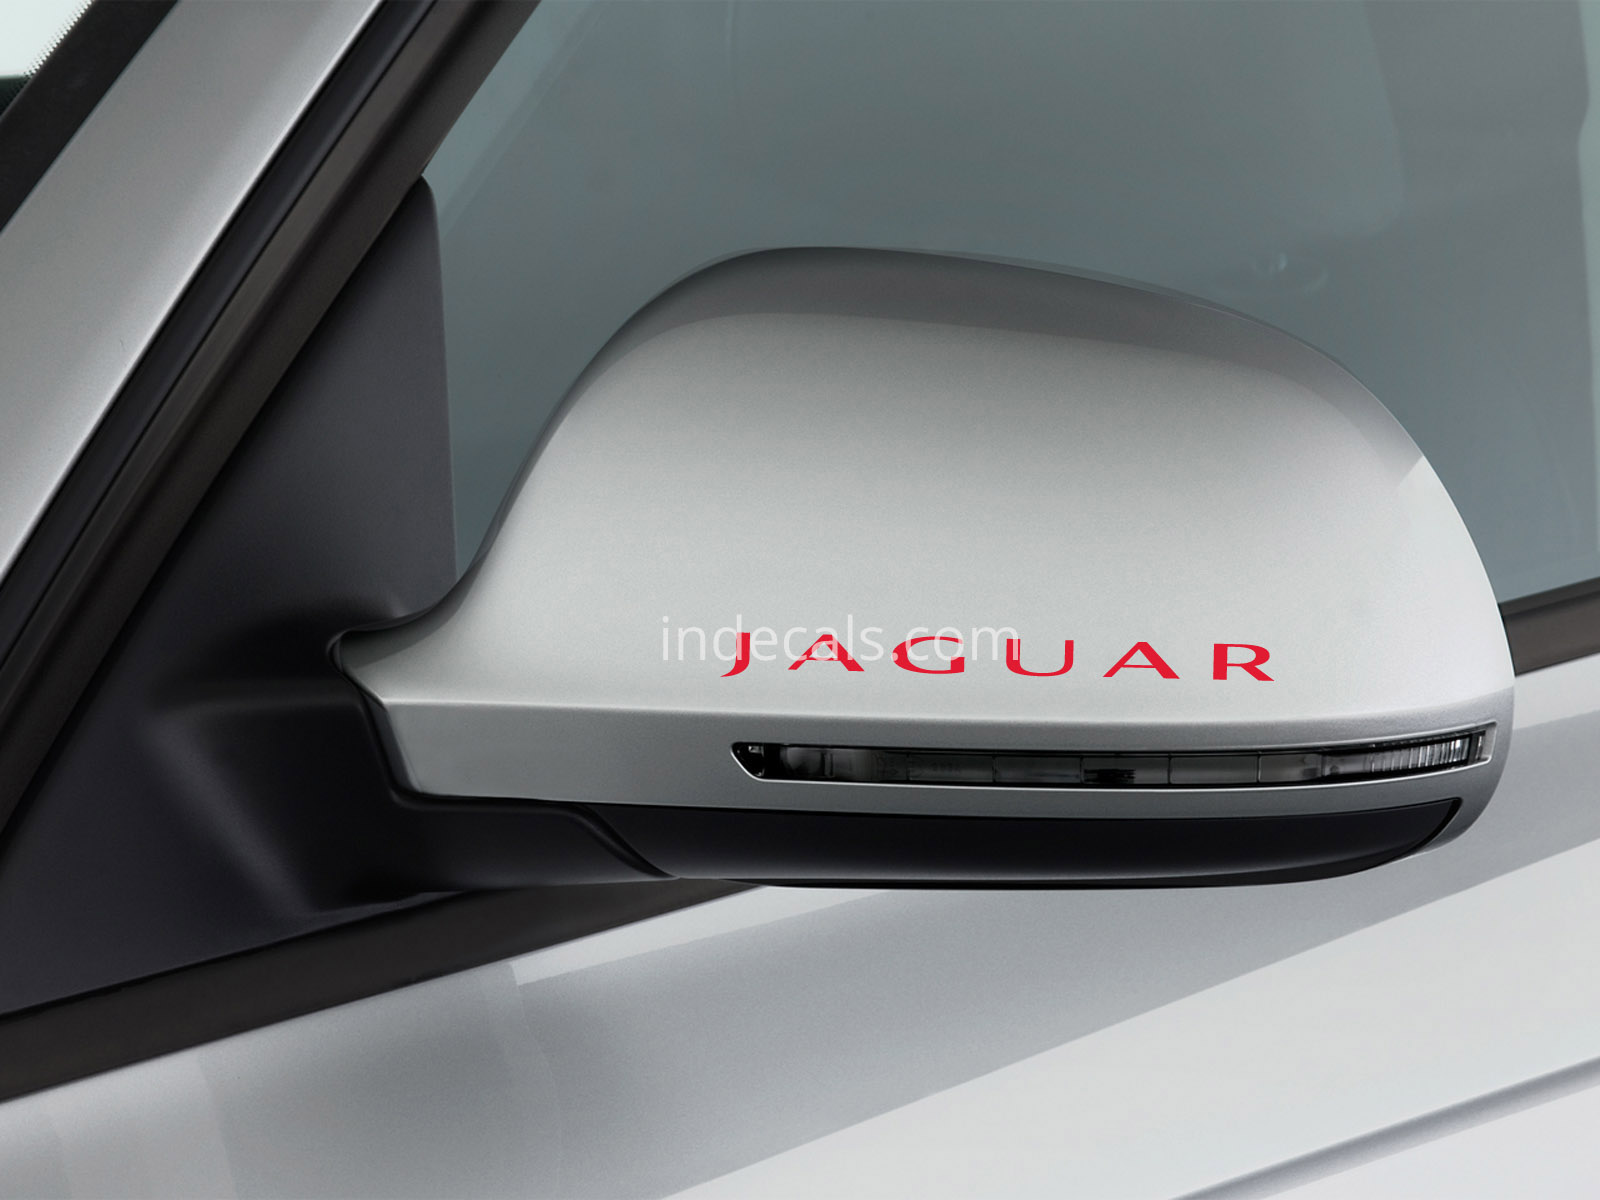 3 x Jaguar Stickers for Mirrors - Red